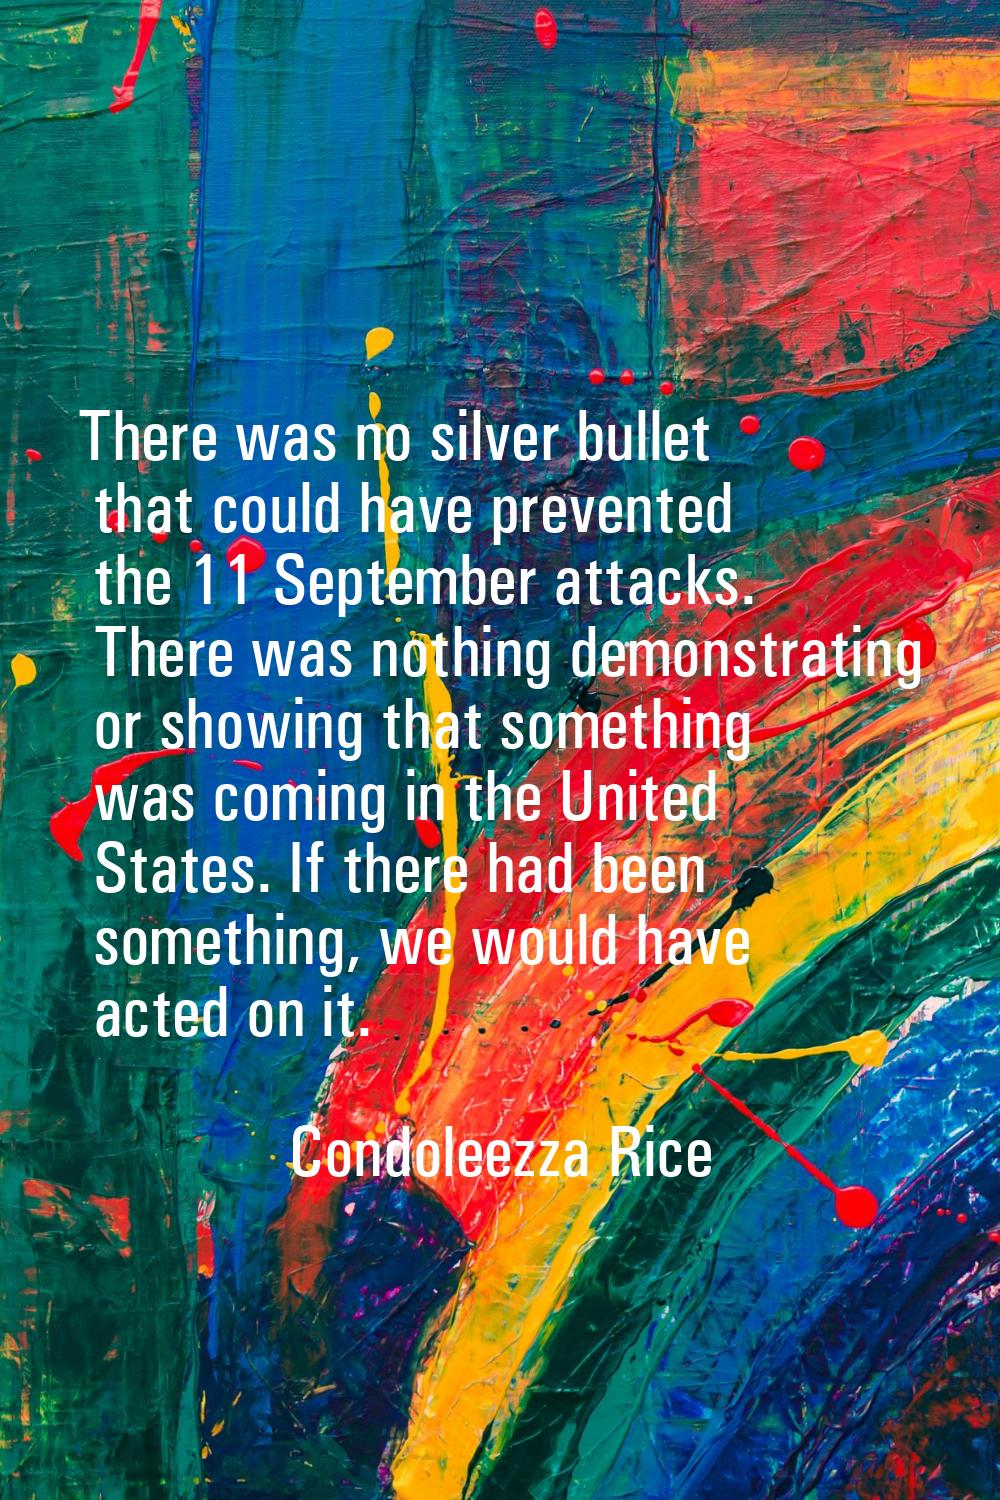 There was no silver bullet that could have prevented the 11 September attacks. There was nothing de